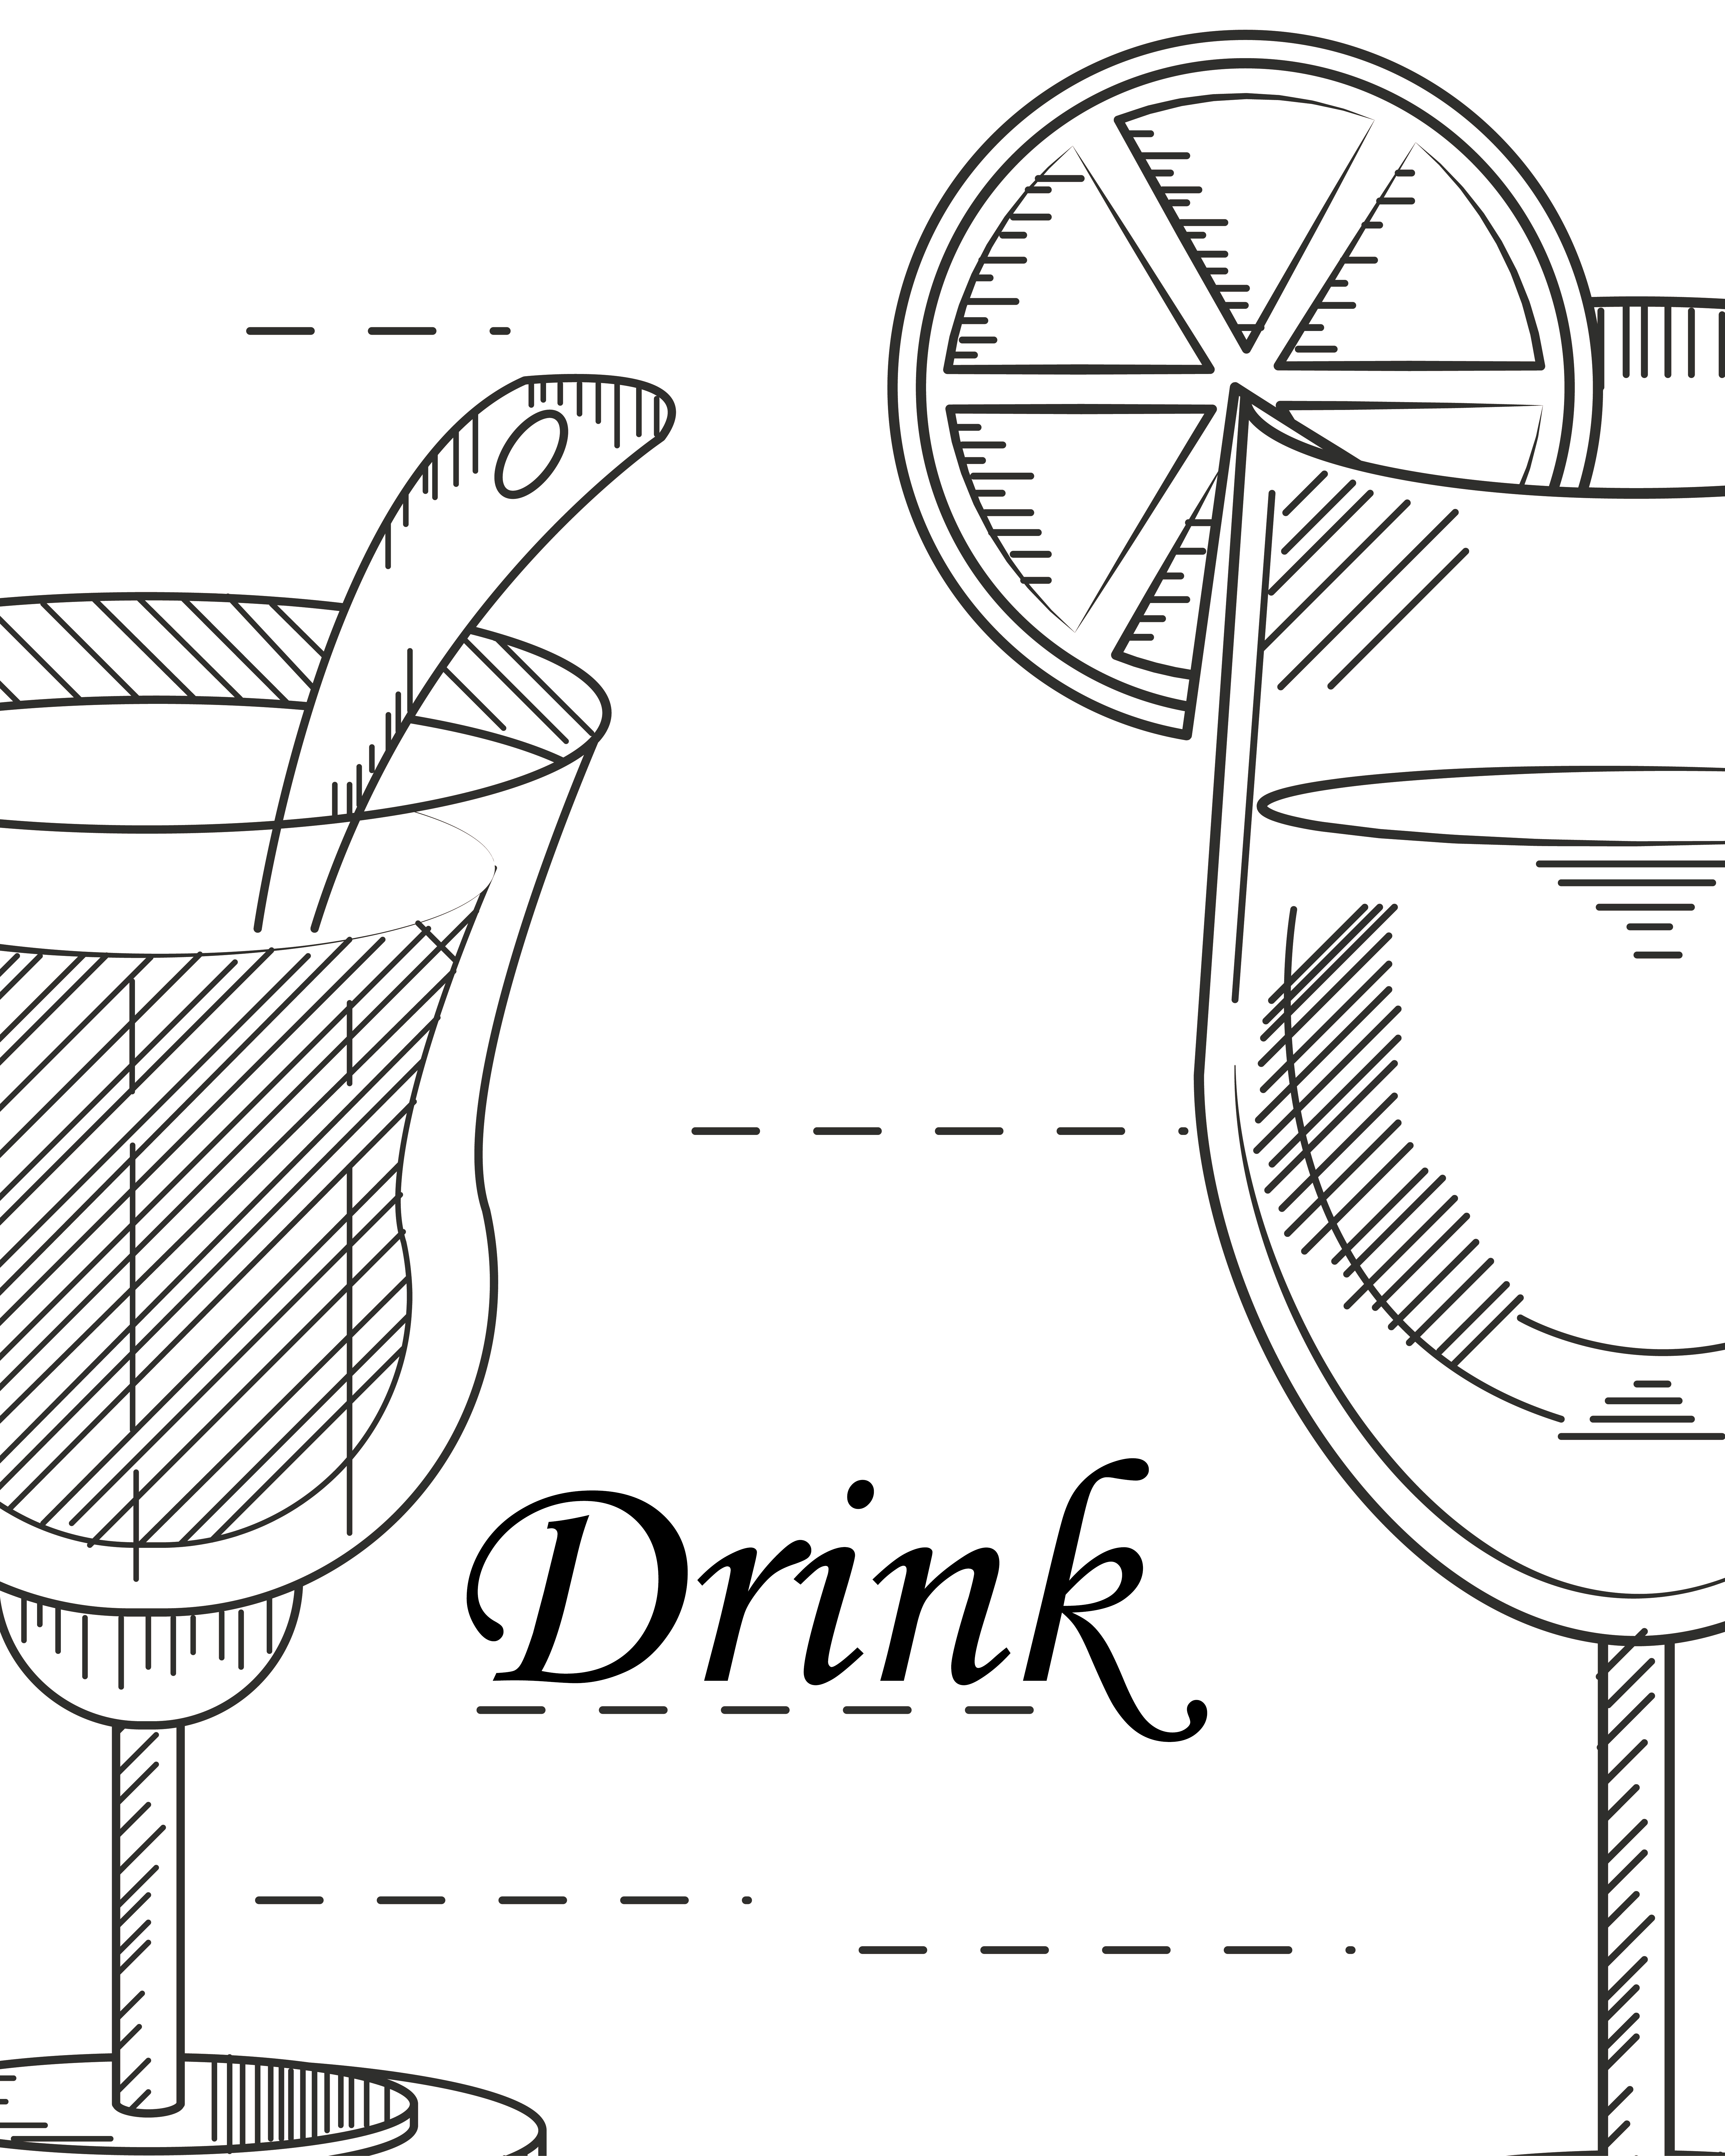 Cocktail Glass Cup Alcoholic Beverage Outline Vector Illustration Eps 10  Royalty Free SVG, Cliparts, Vectors, and Stock Illustration. Image 67525250.